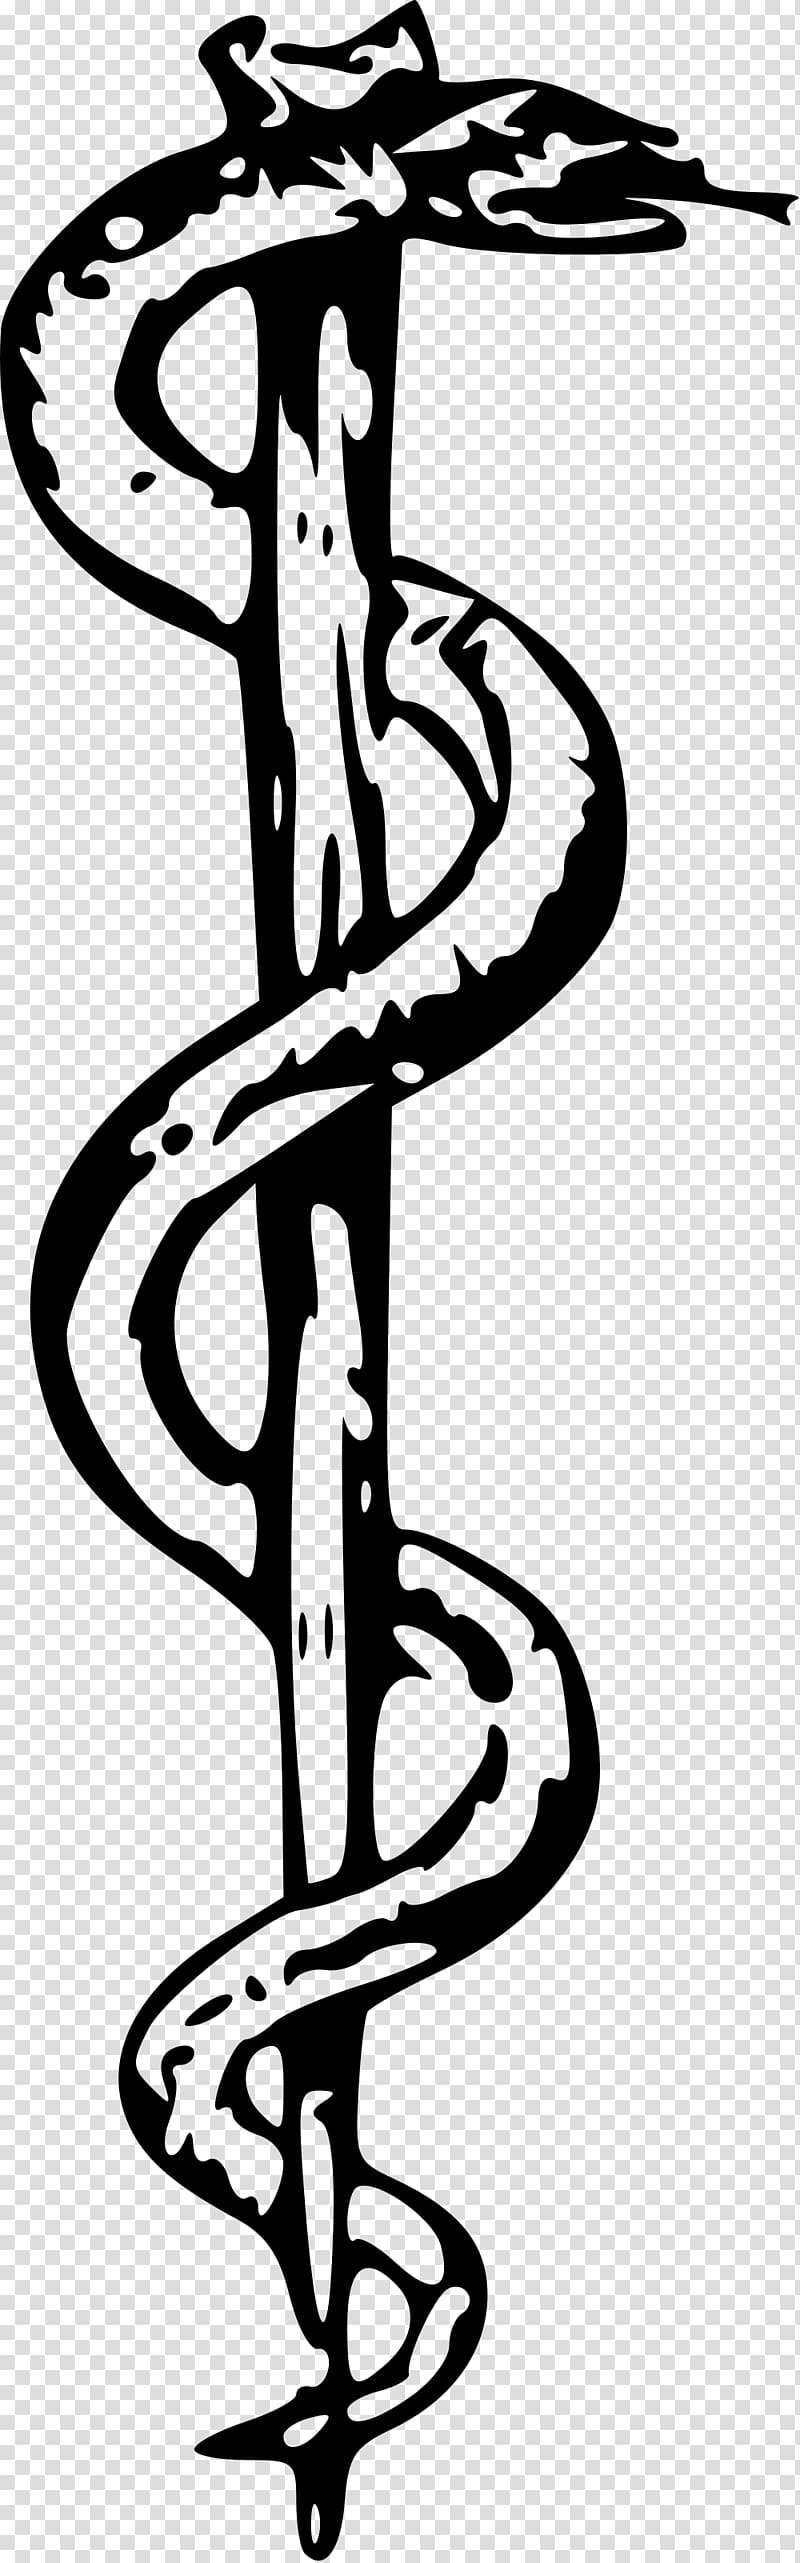 Asclepius: Over 2,321 Royalty-Free Licensable Stock Illustrations &  Drawings | Shutterstock